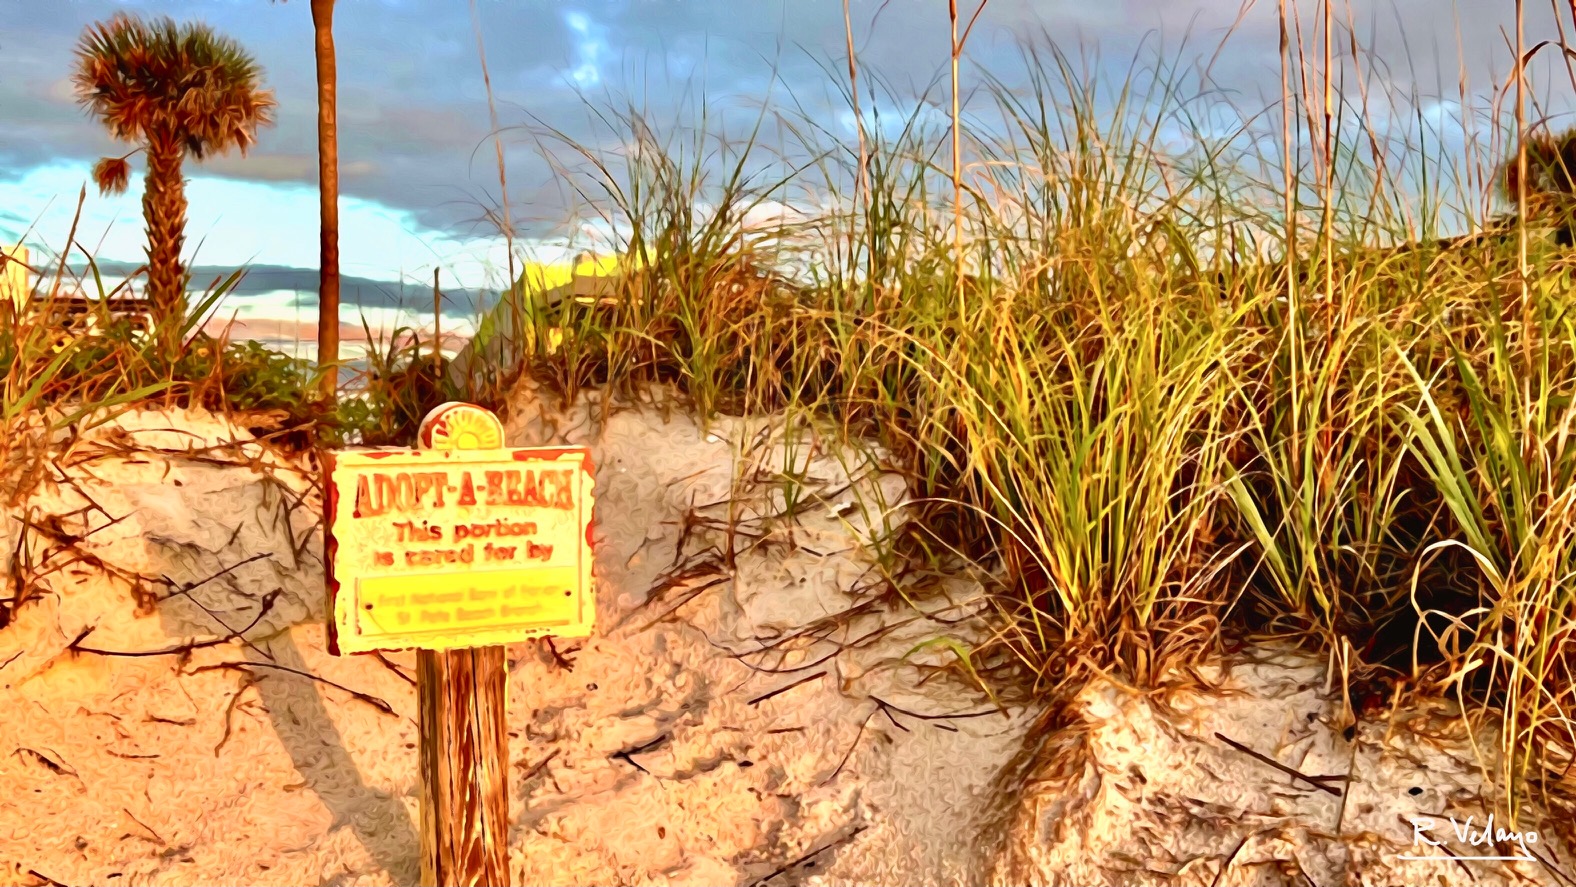 "ADOPT-A-BEACH SIGN AT SUNSET IN PASS-A-GRILLE BEACH" [Created: 11/24/2022]